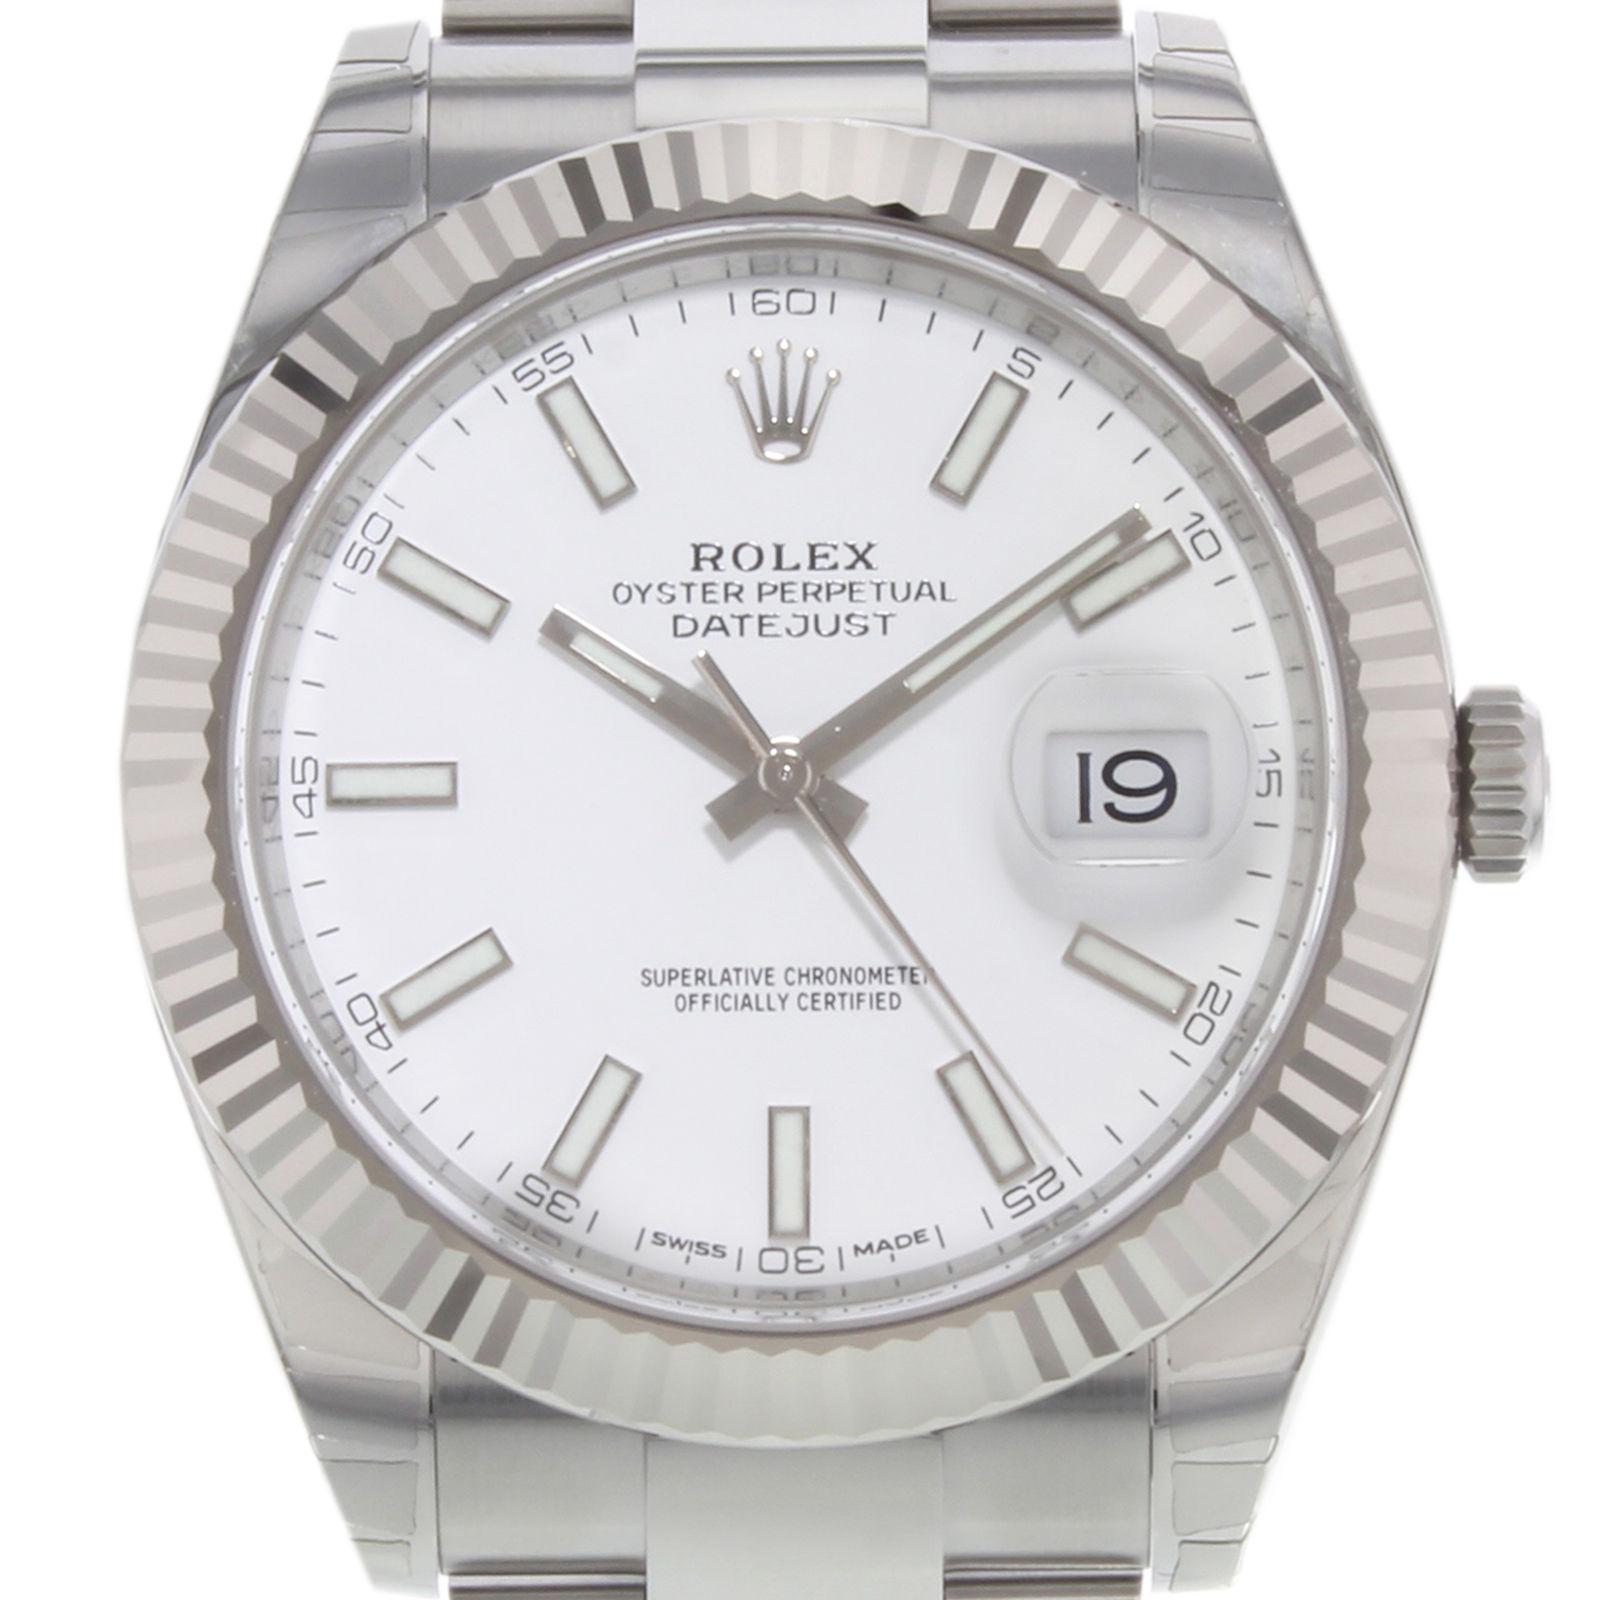 (19539)
This brand new Rolex Datejust 41 126334 wio is a beautiful men's timepiece that is powered by an automatic movement which is cased in a stainless steel case. It has a round shape face, date dial and has hand sticks style markers. It is